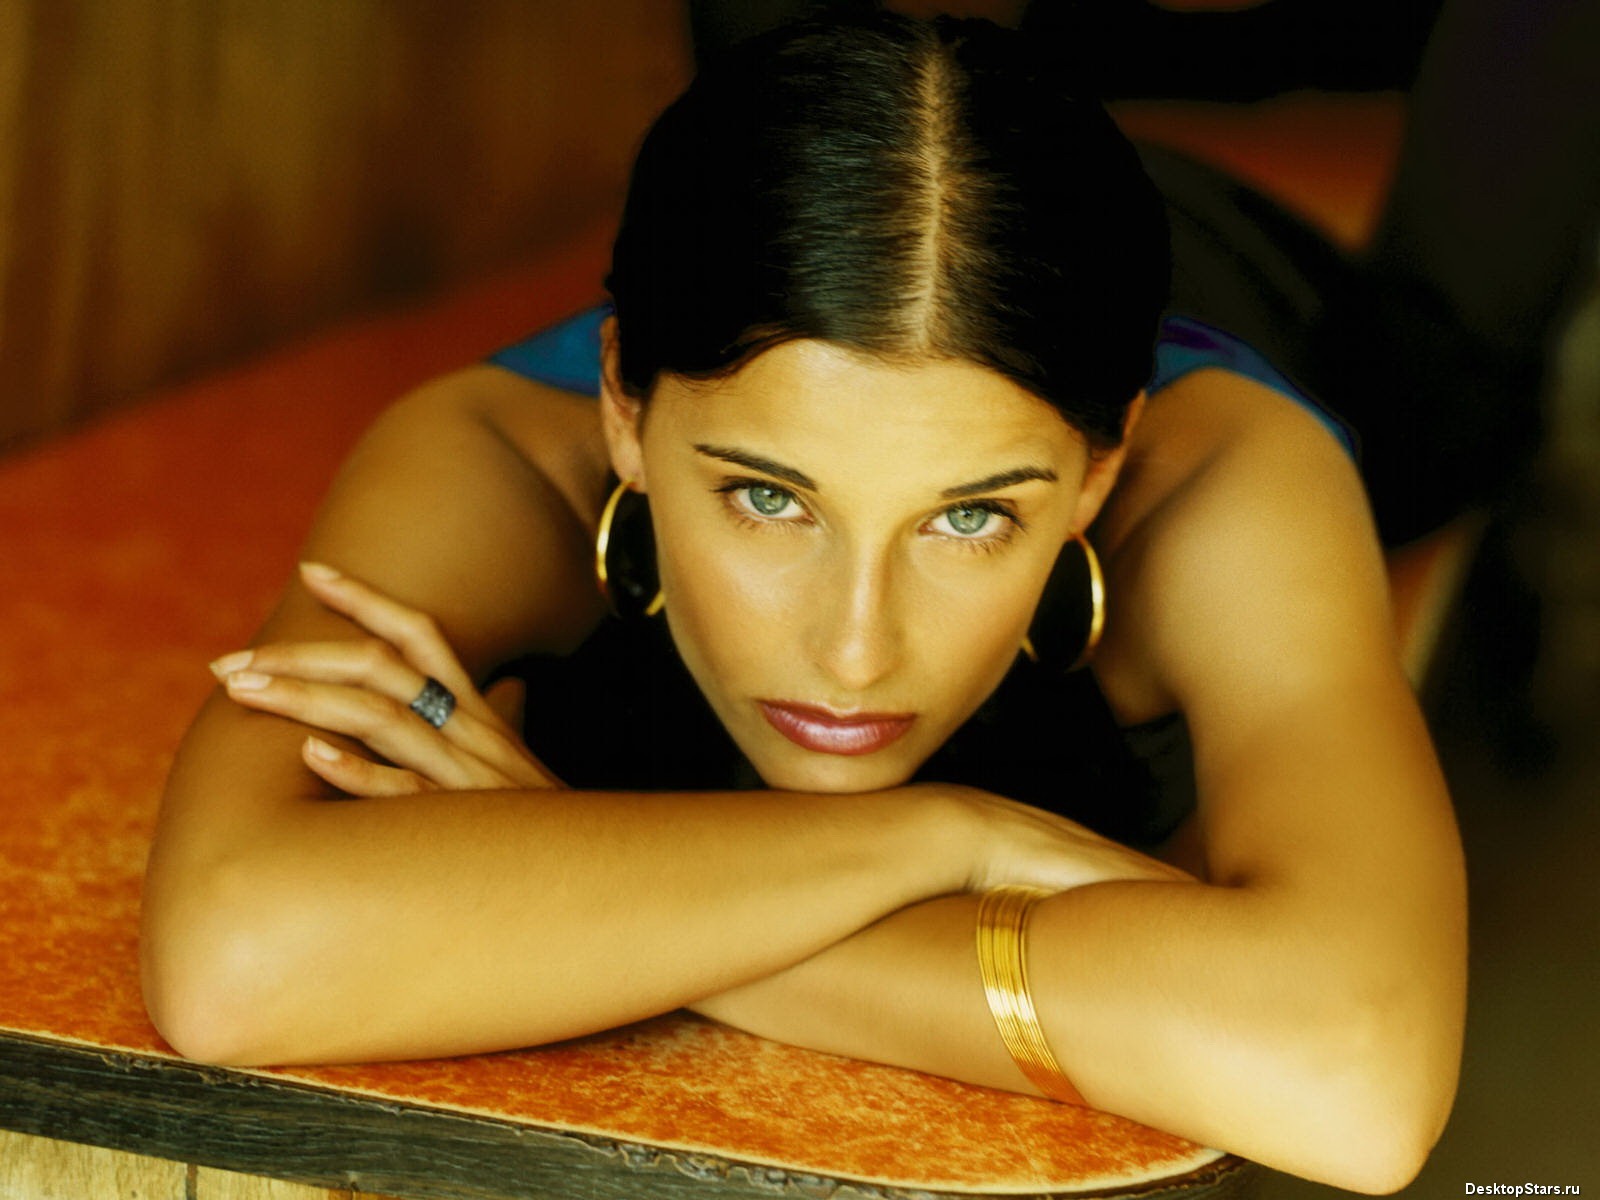 Nelly Furtado #009 - 1600x1200 Wallpapers Pictures Photos Images